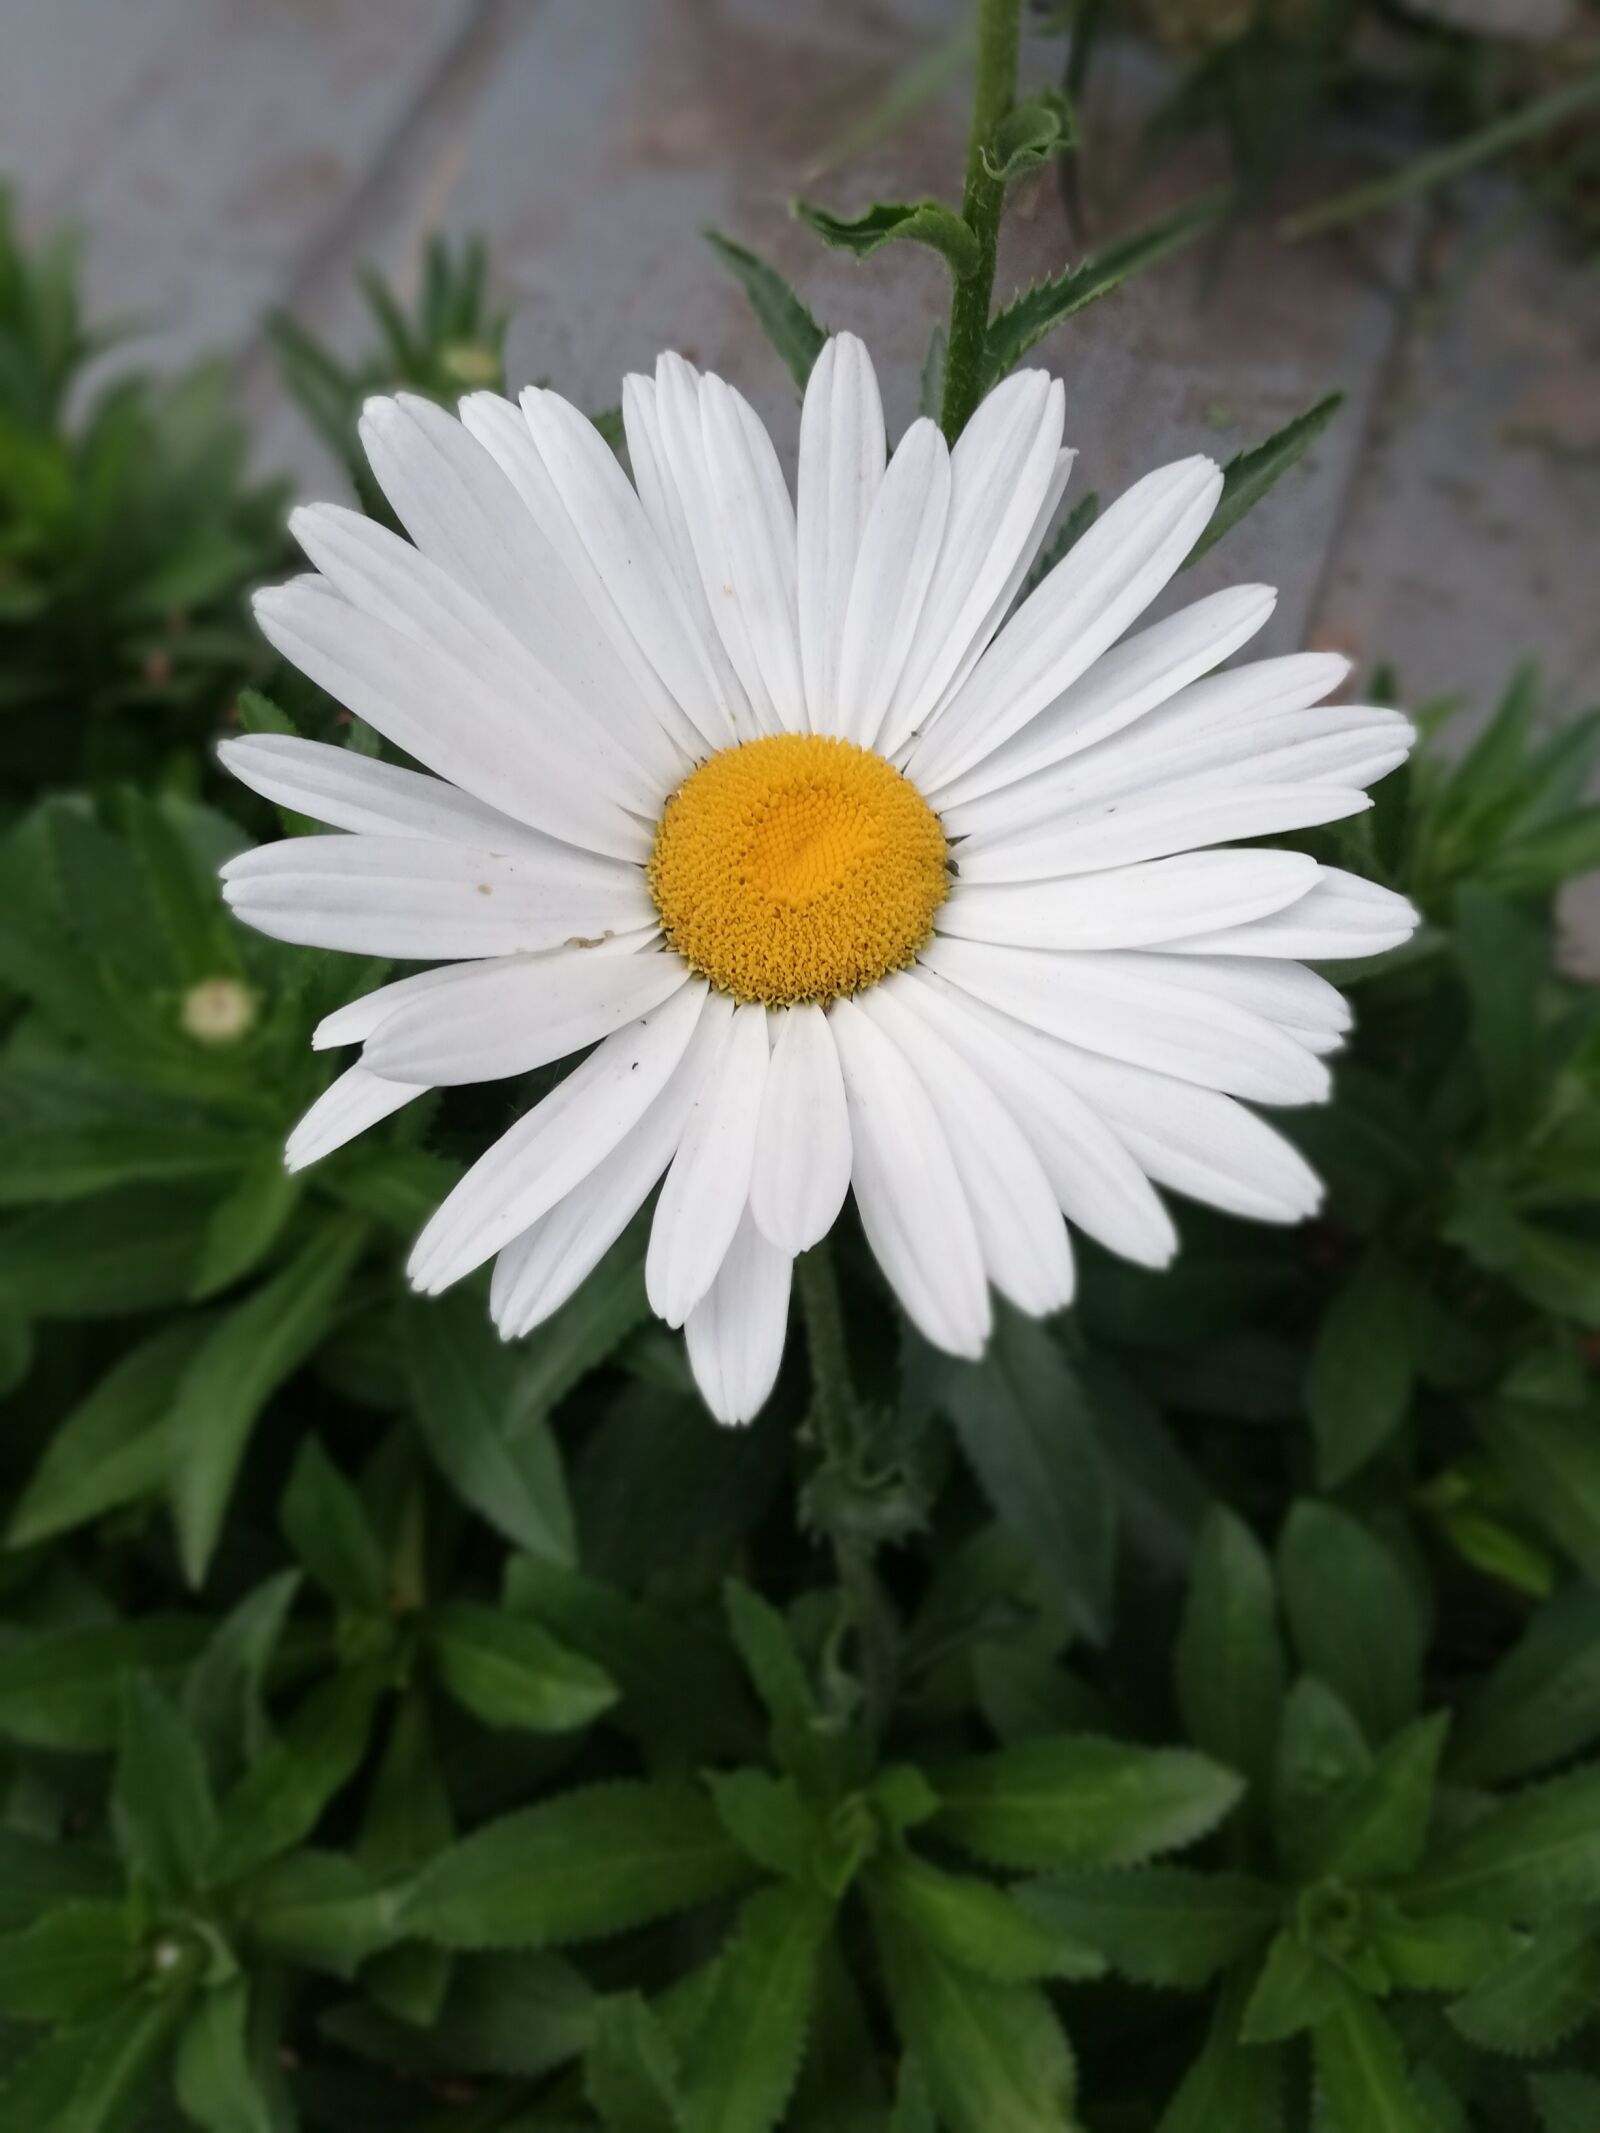 HUAWEI Mate 10 Lite sample photo. Flower, daisy, spring photography